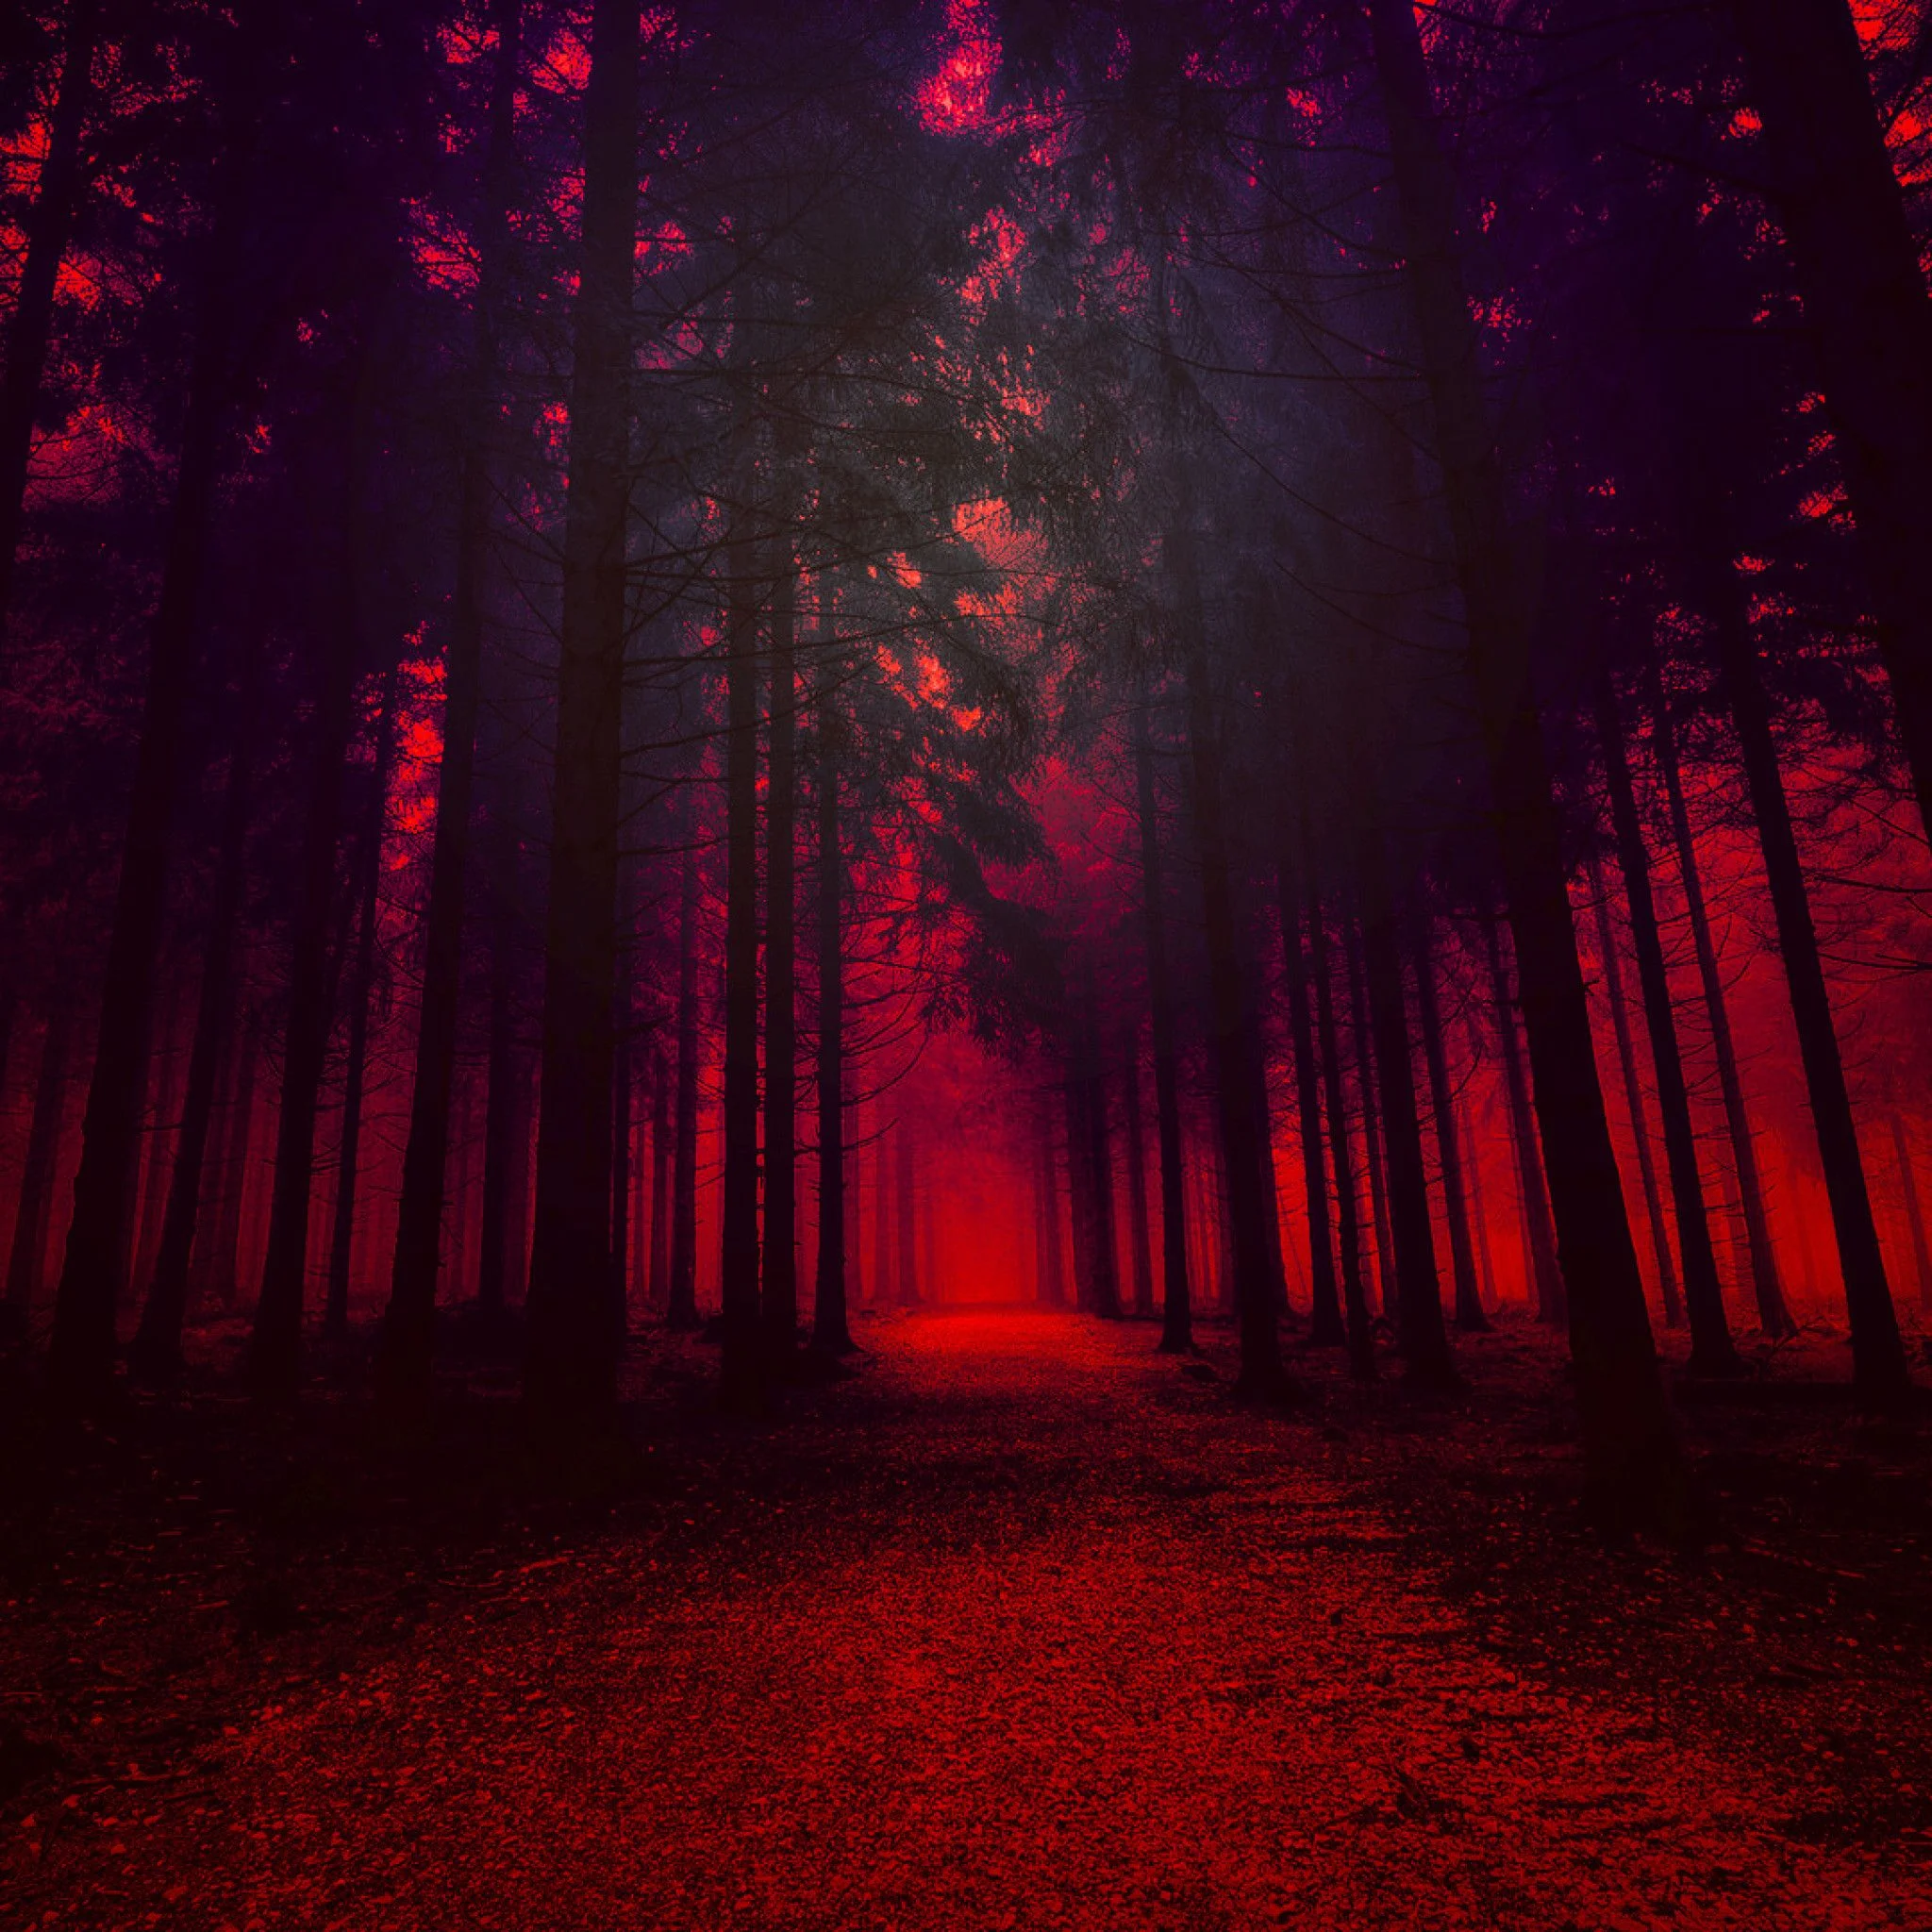 A red and black forest with a red light at the end of the path - Crimson